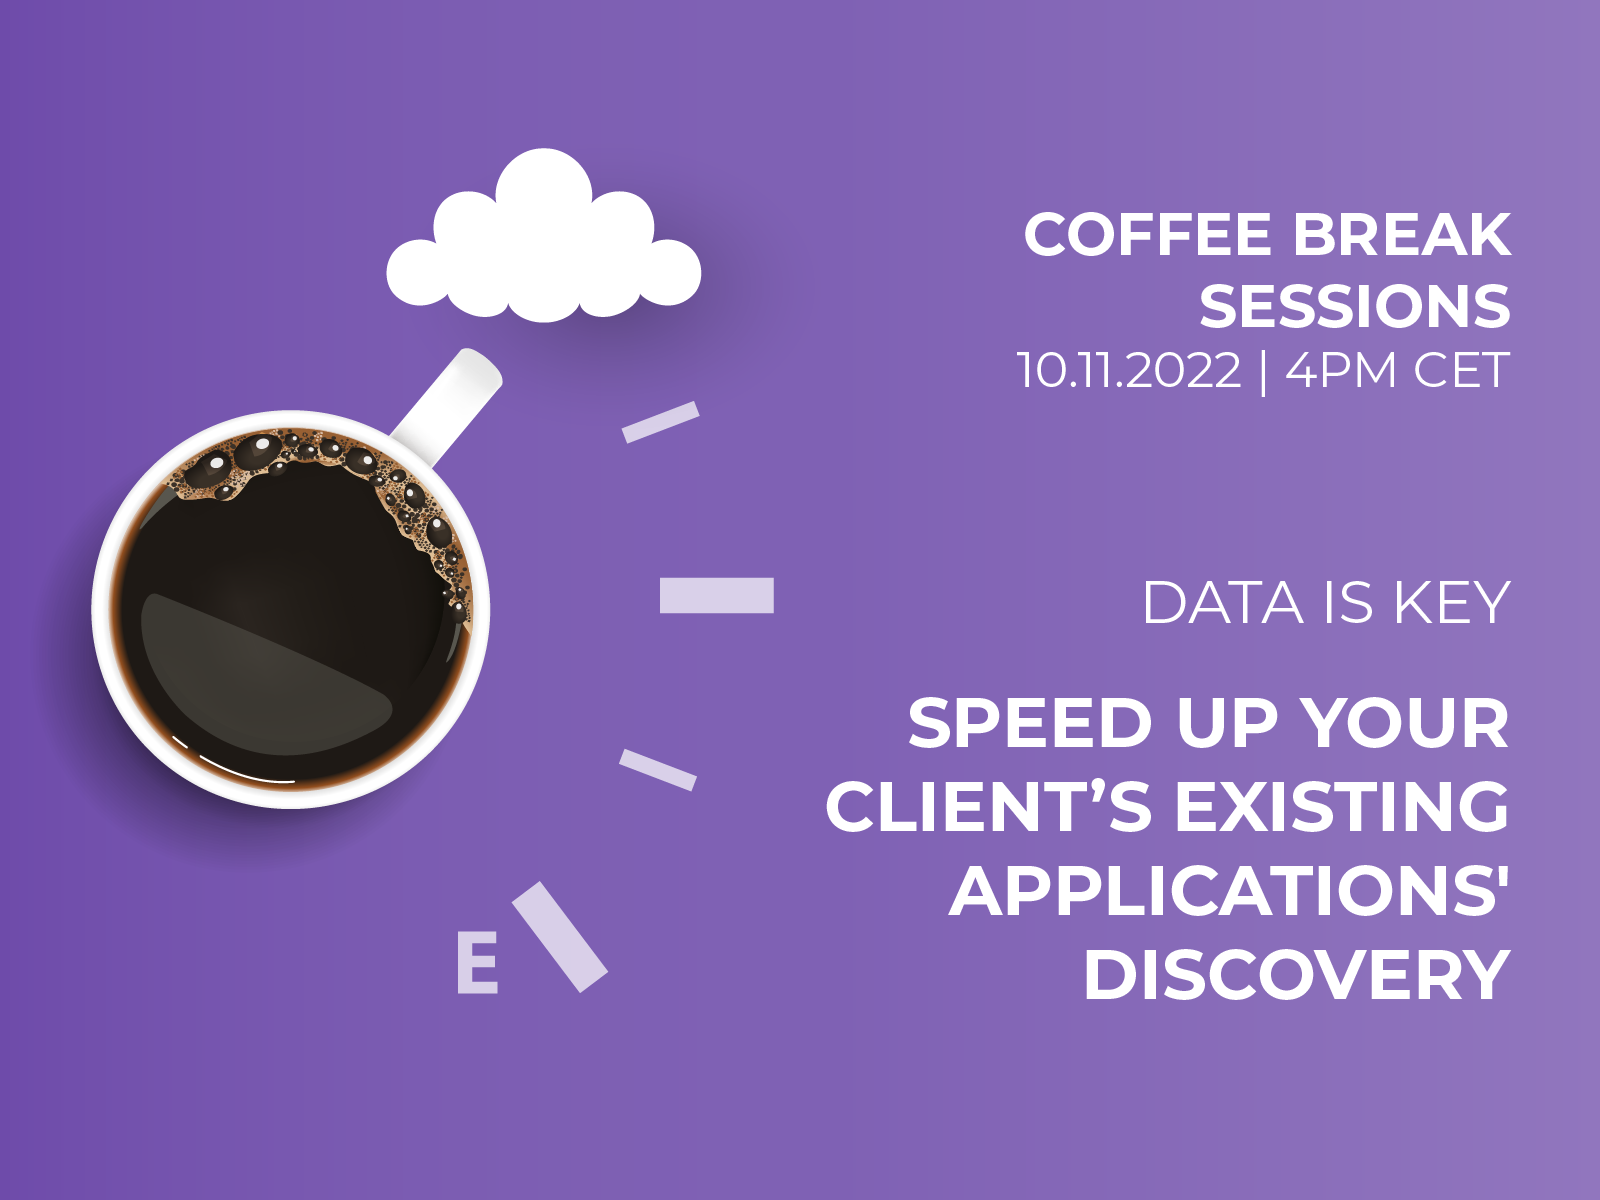 Data is key: Speed up your client’s existing applications' discovery